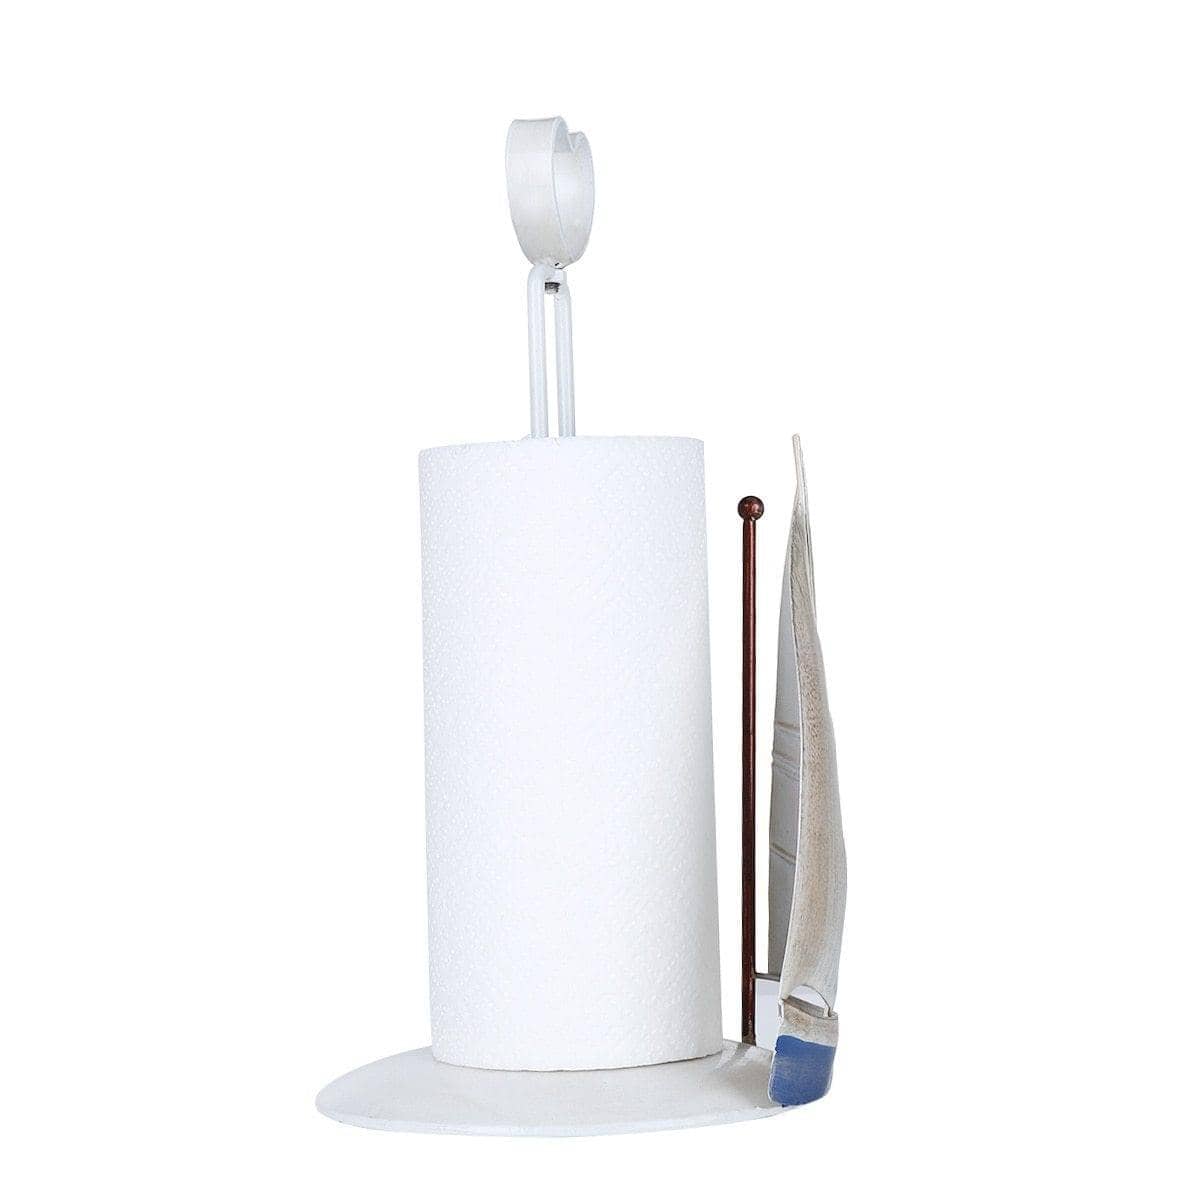 Nautical Paper Towel Holder - Sail Away with Style & Functionality